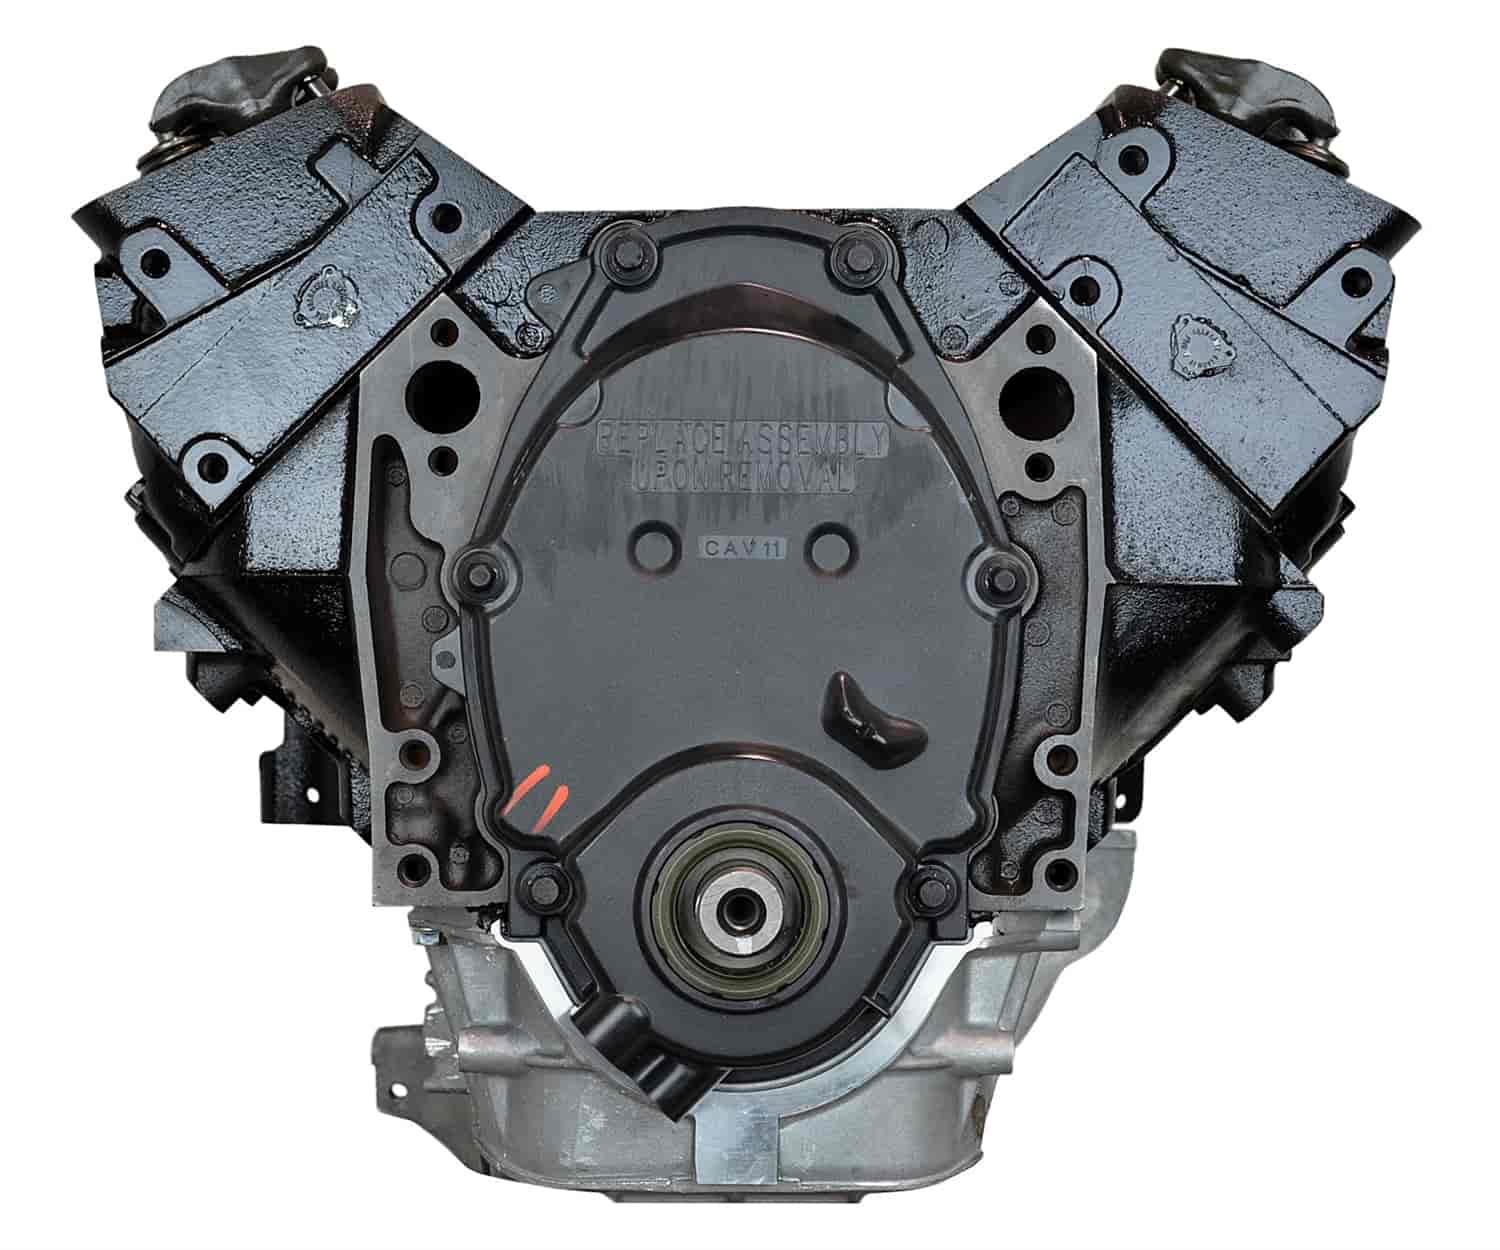 Remanufactured Crate Engine for 1996-1999 Chevy/GMC C/K Truck, SUV, & Van with 4.3L V6